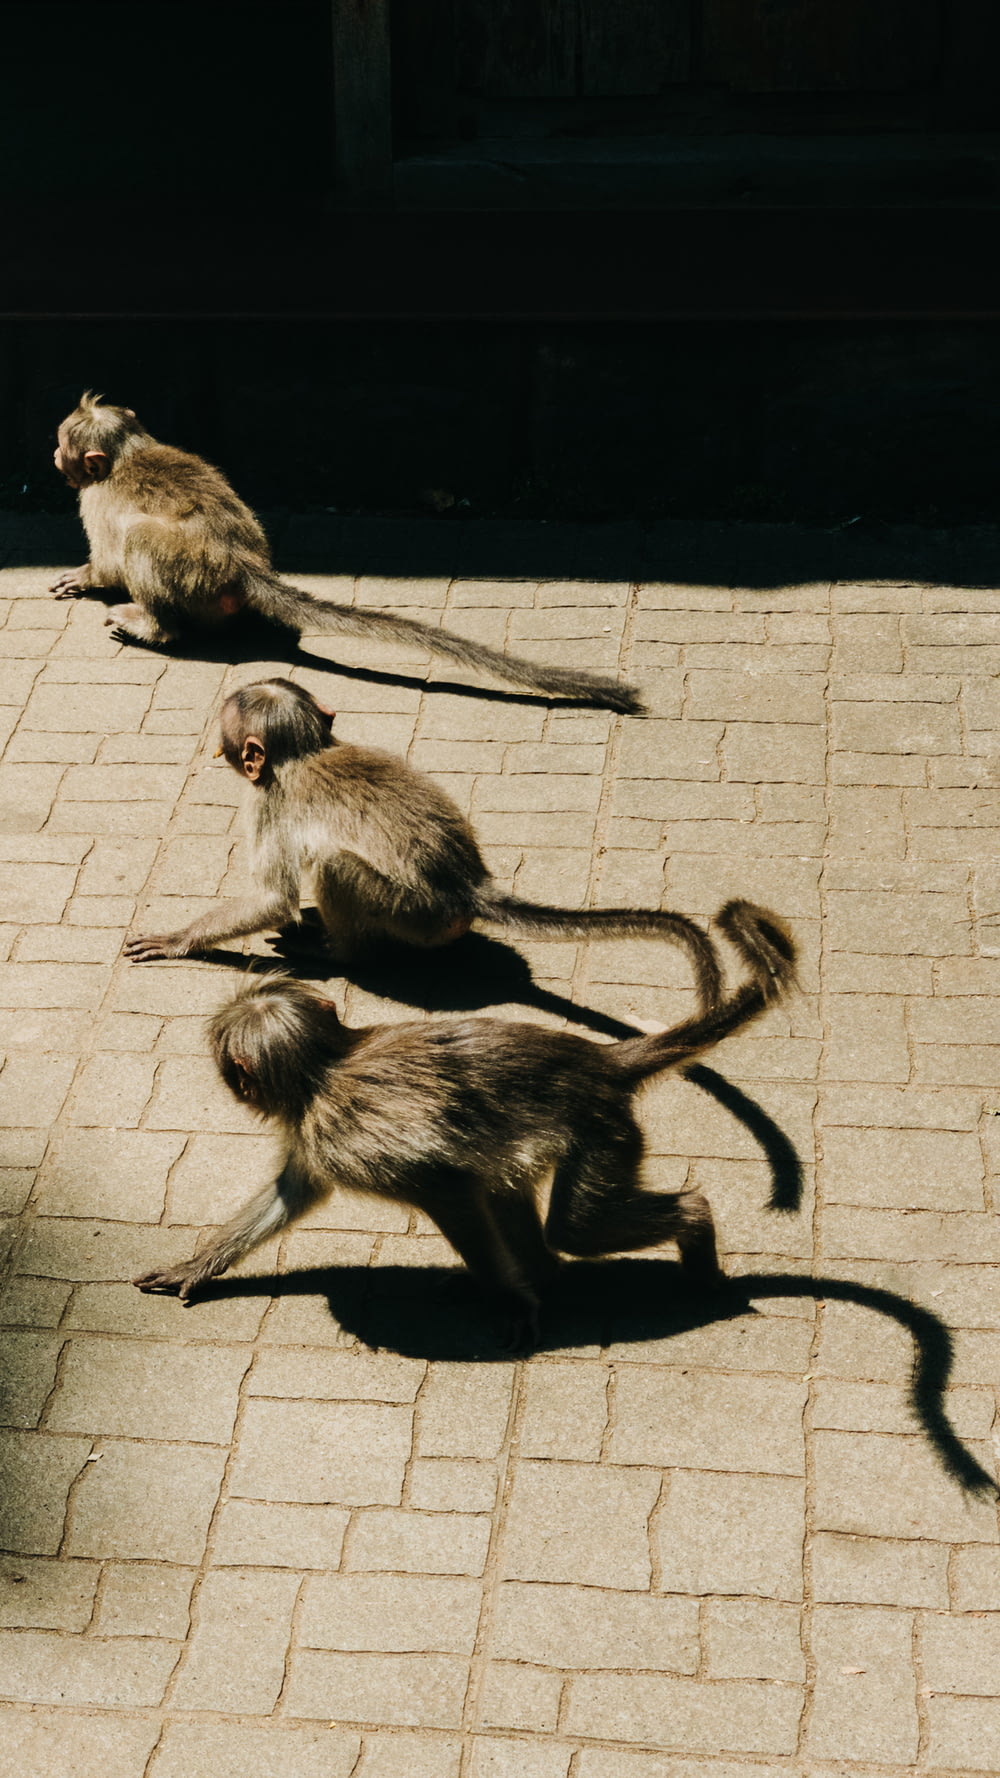 a group of monkeys sitting on the ground